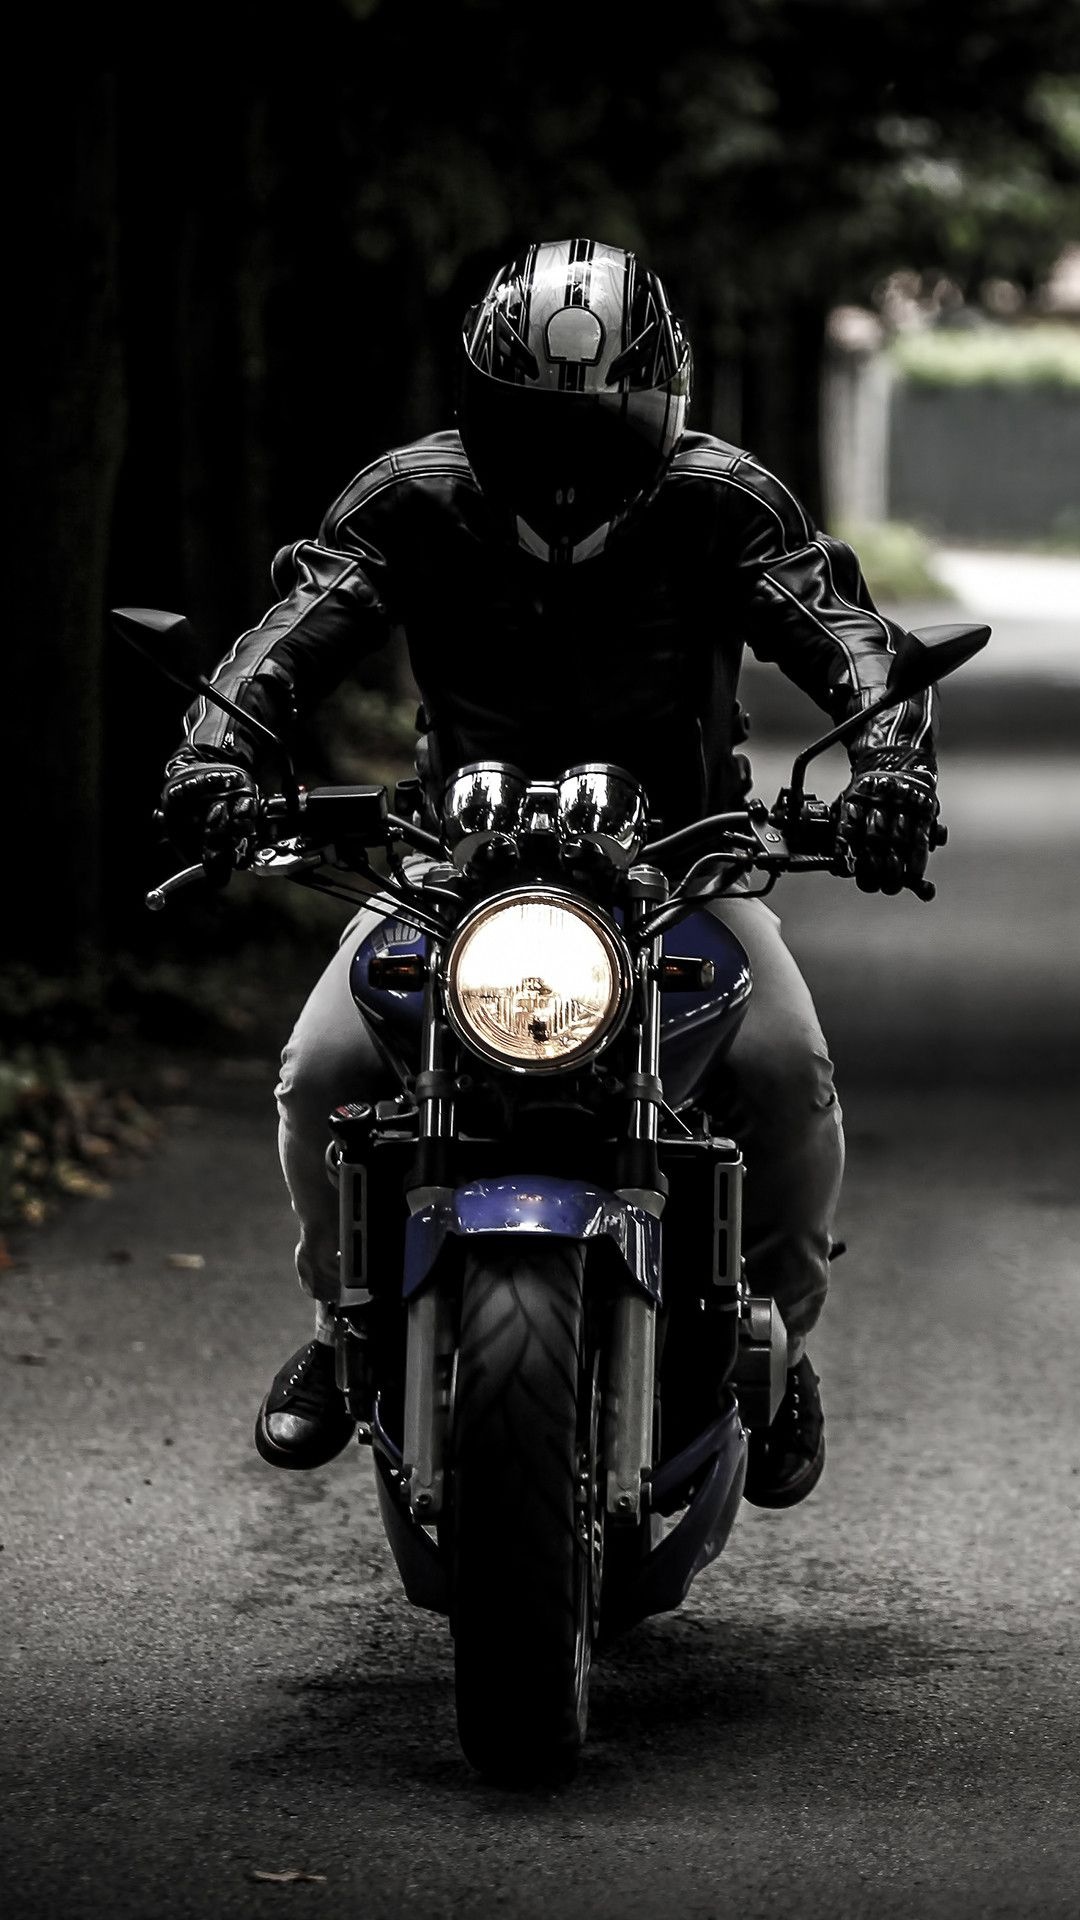 Street Bike, Motorcycle wallpapers, Rider's paradise, On the open road, 1080x1920 Full HD Phone